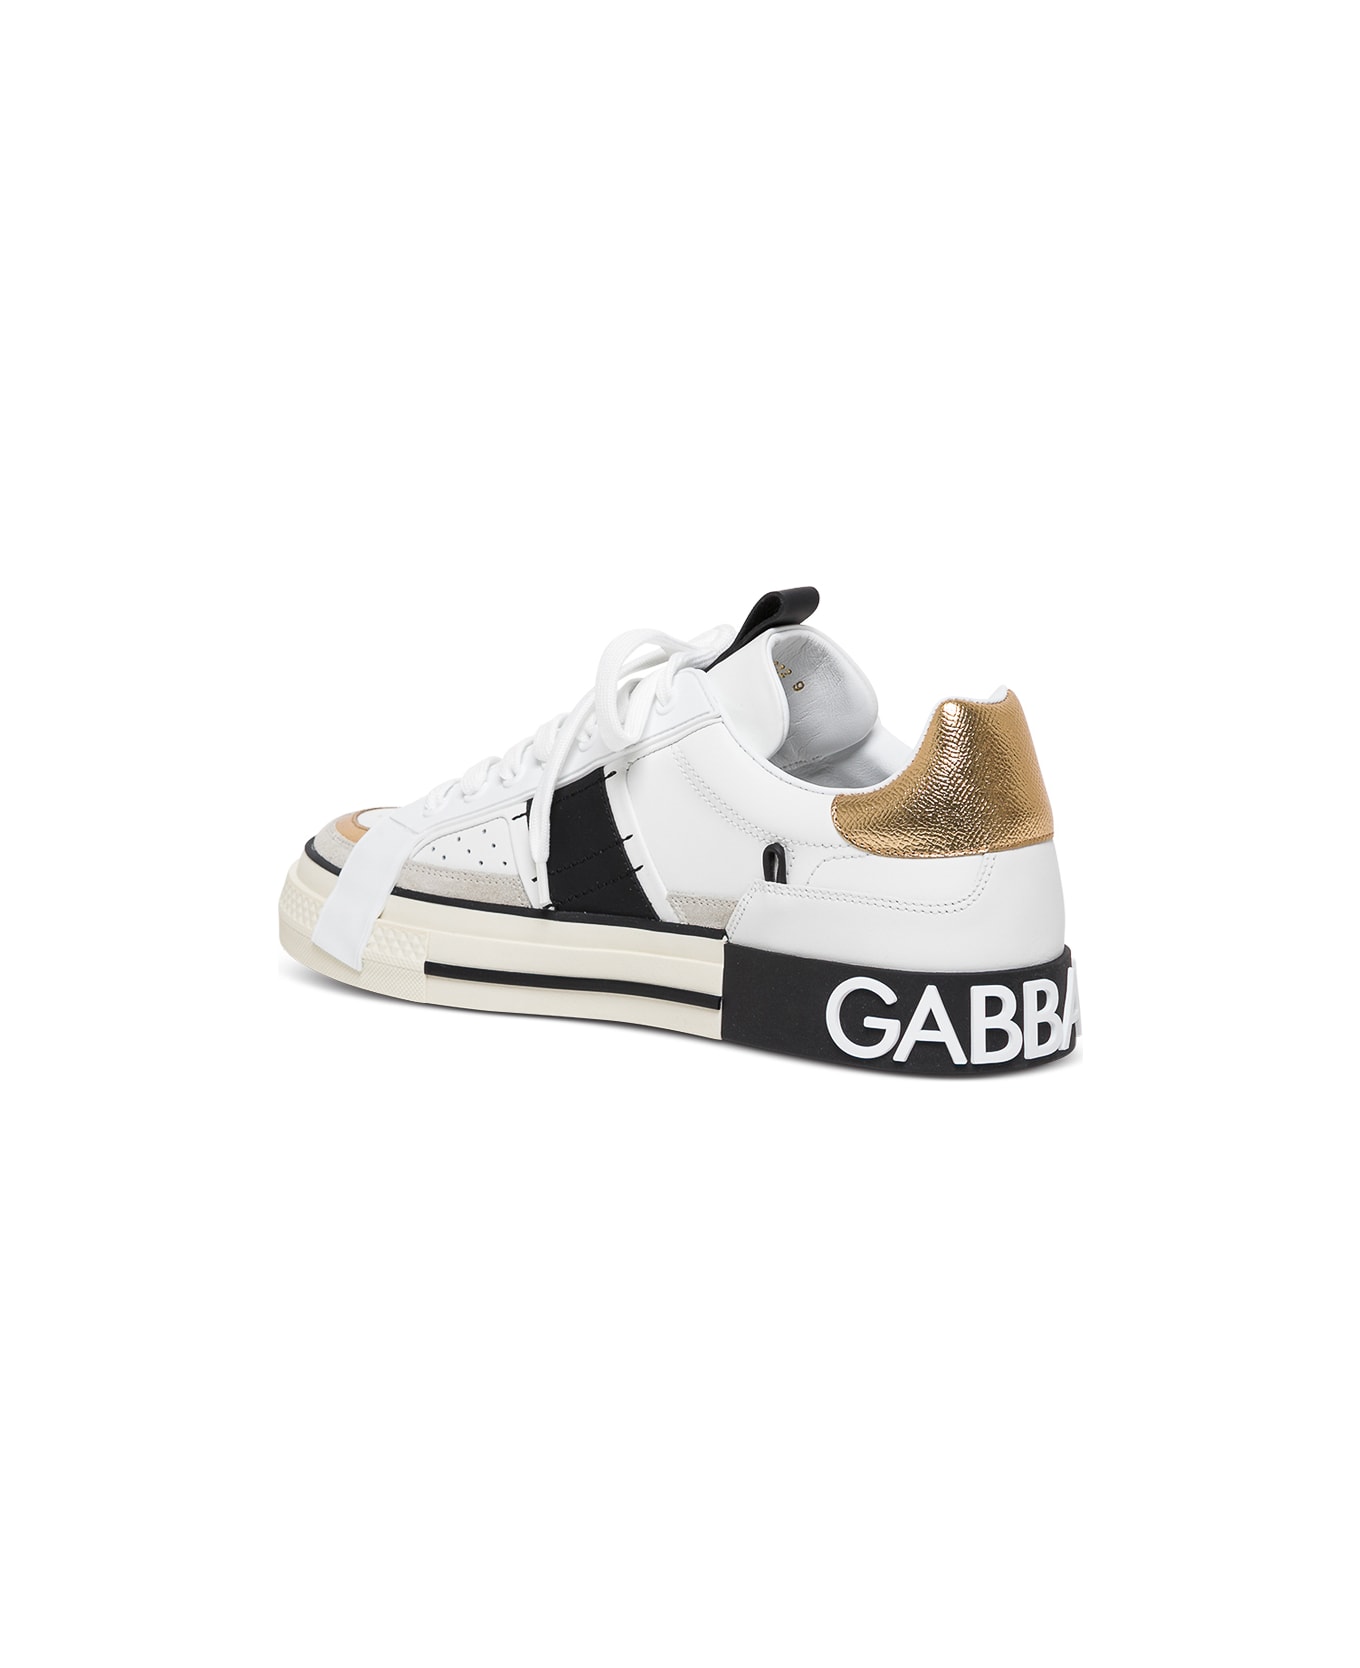 Dolce & Gabbana Custom  Leather Sneakers With Metallic Inserts - White